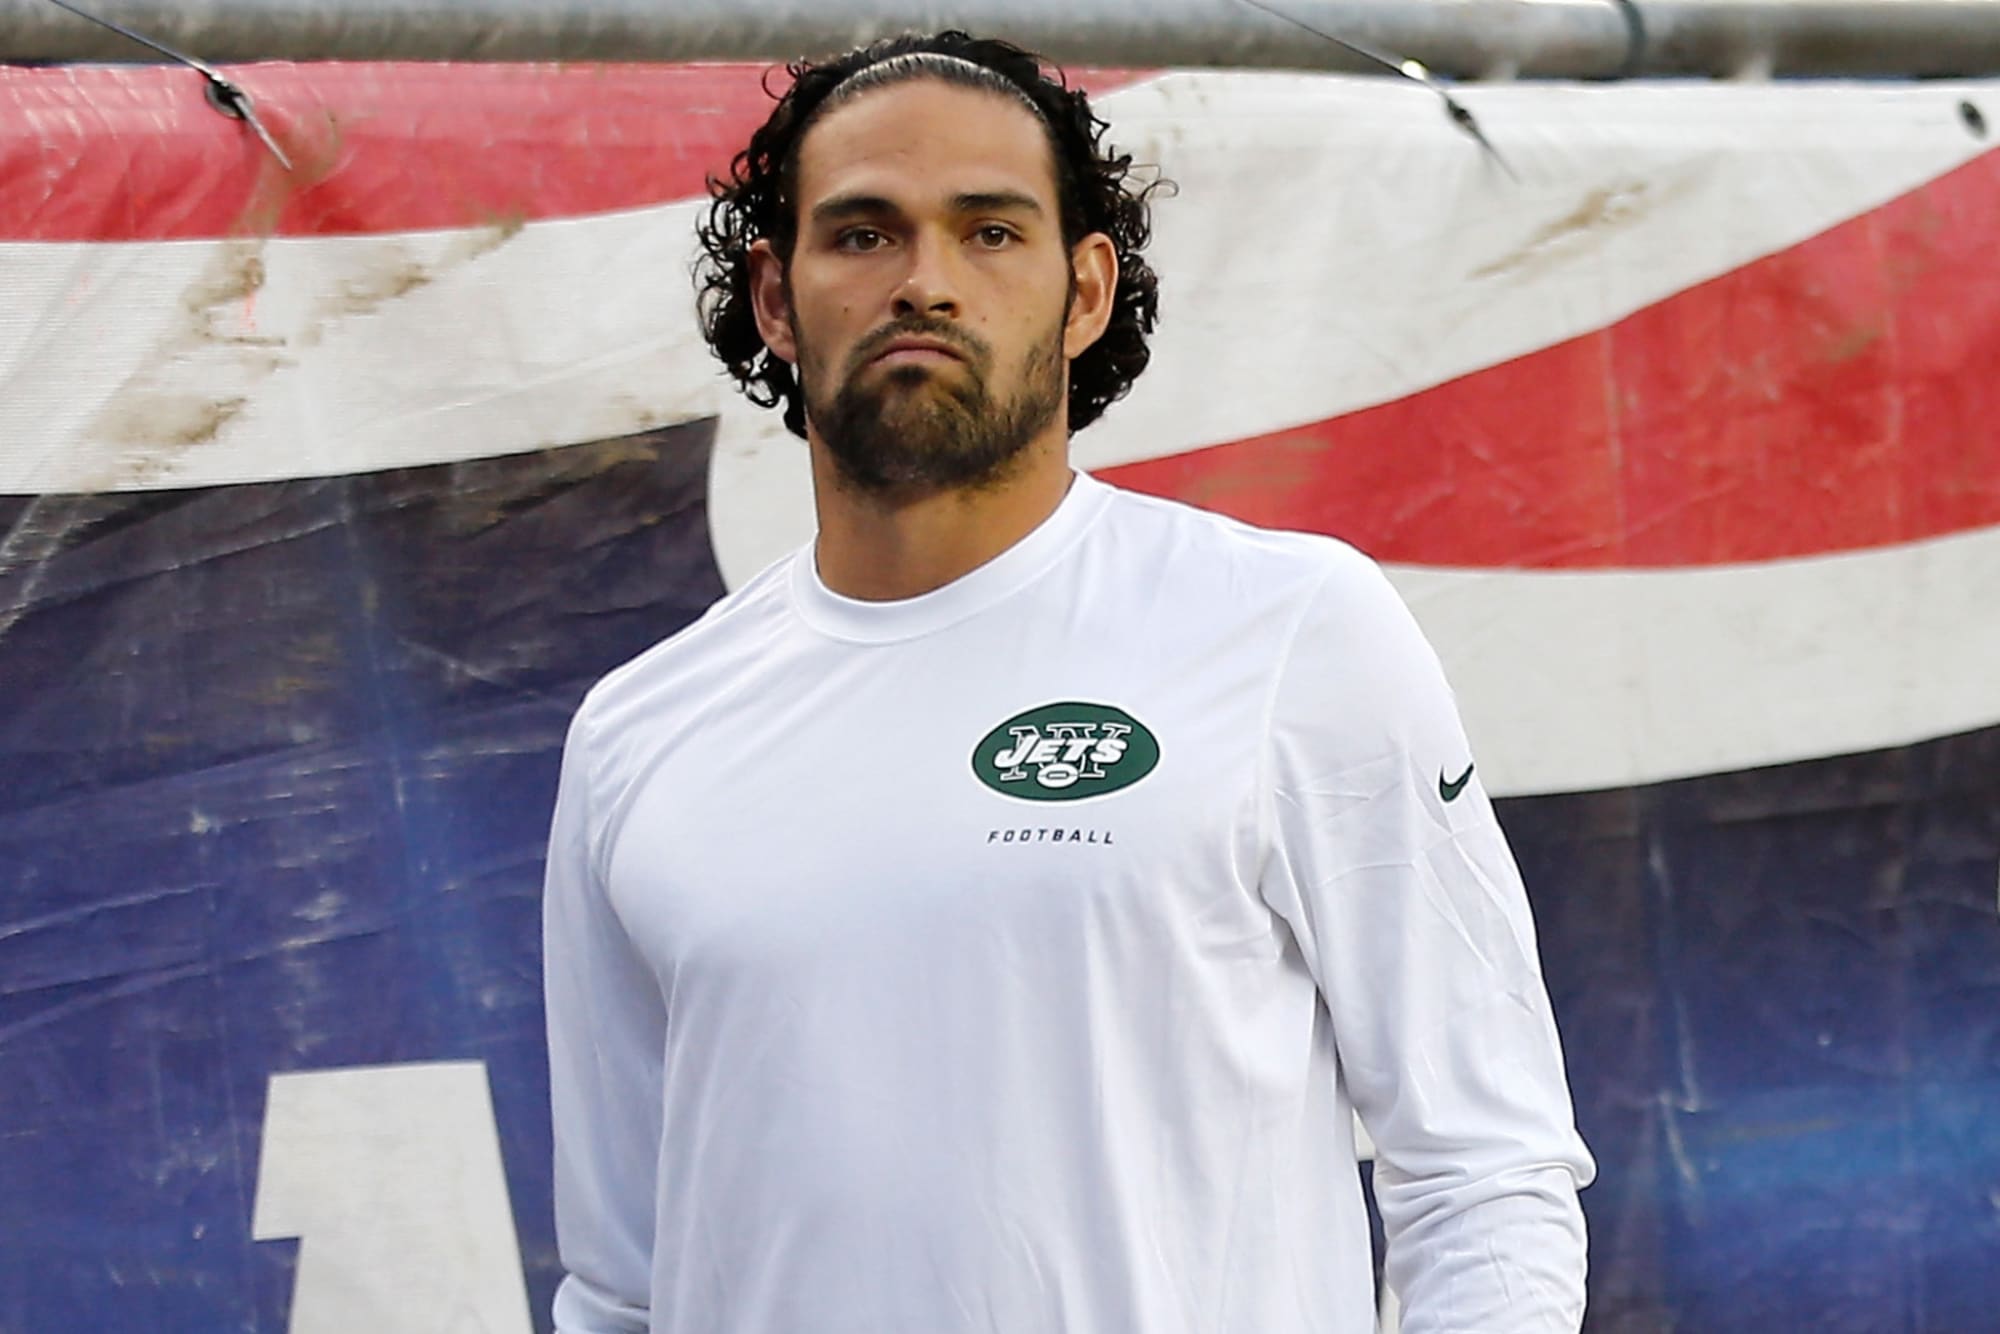 New York Jets: The career of Mark Sanchez left much to be desired